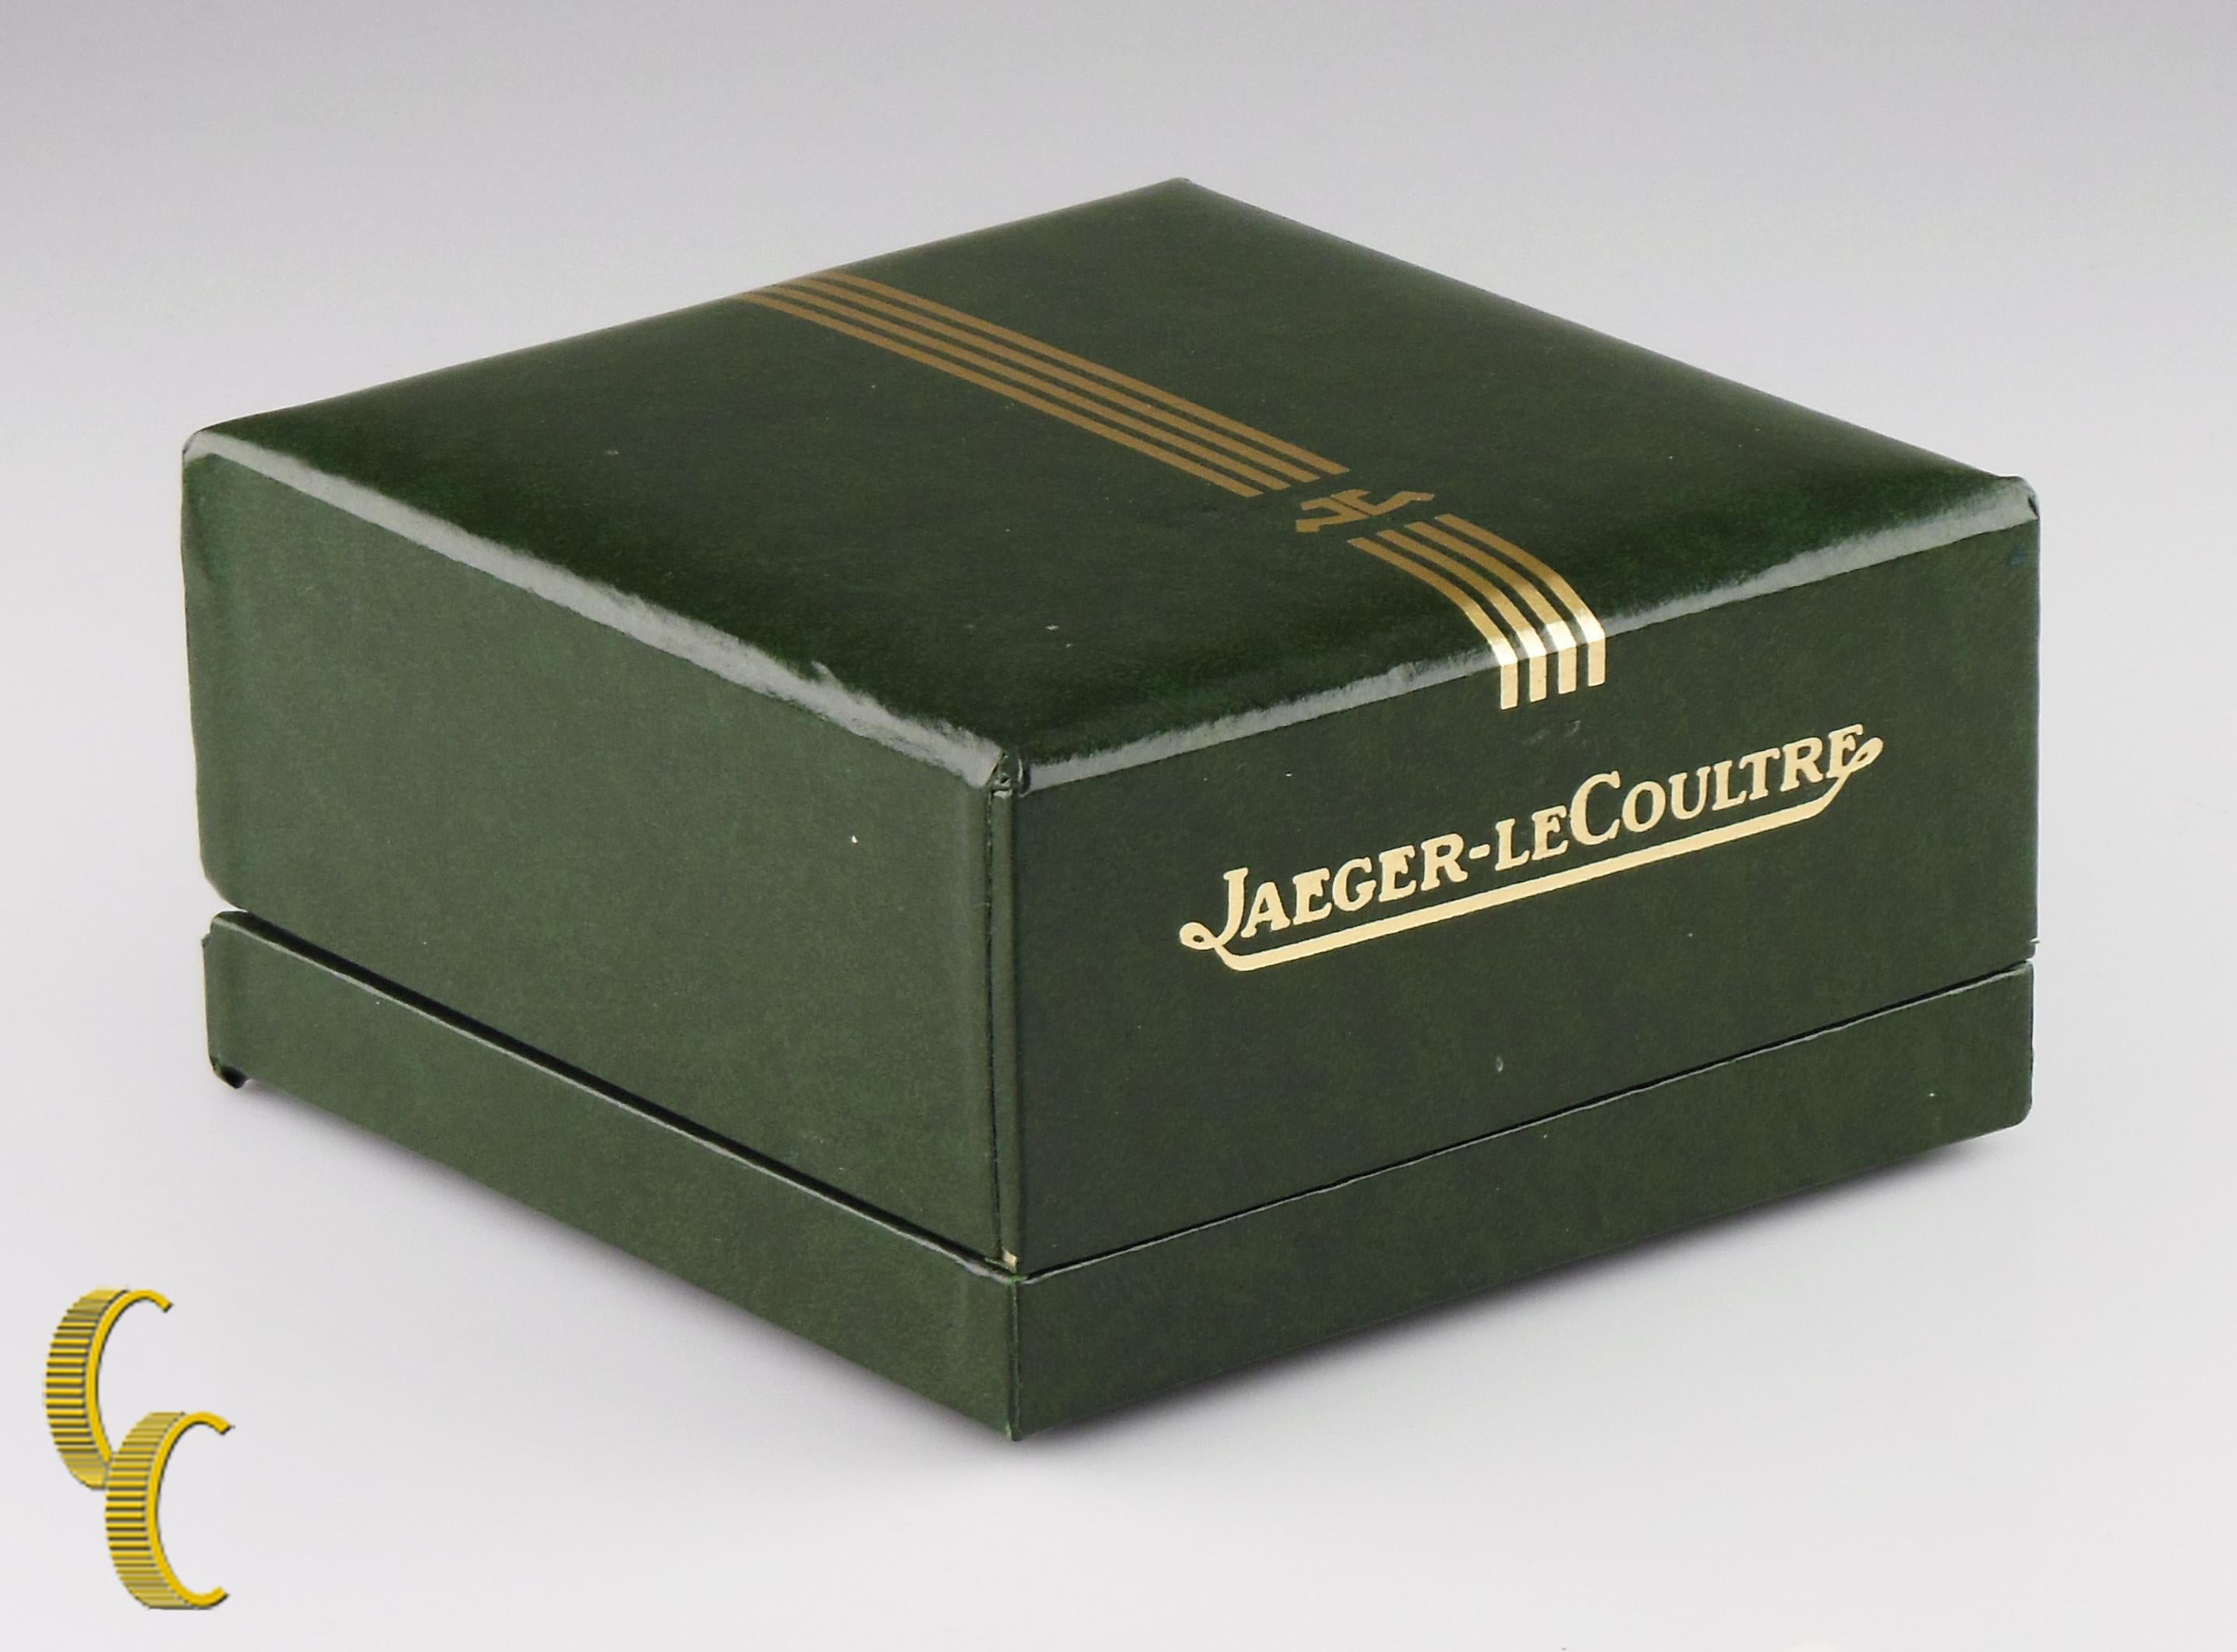 Men's Jaeger-LeCoultre Vintage Hand-Winding Alarm Watch W/ Original Box and Case For Sale